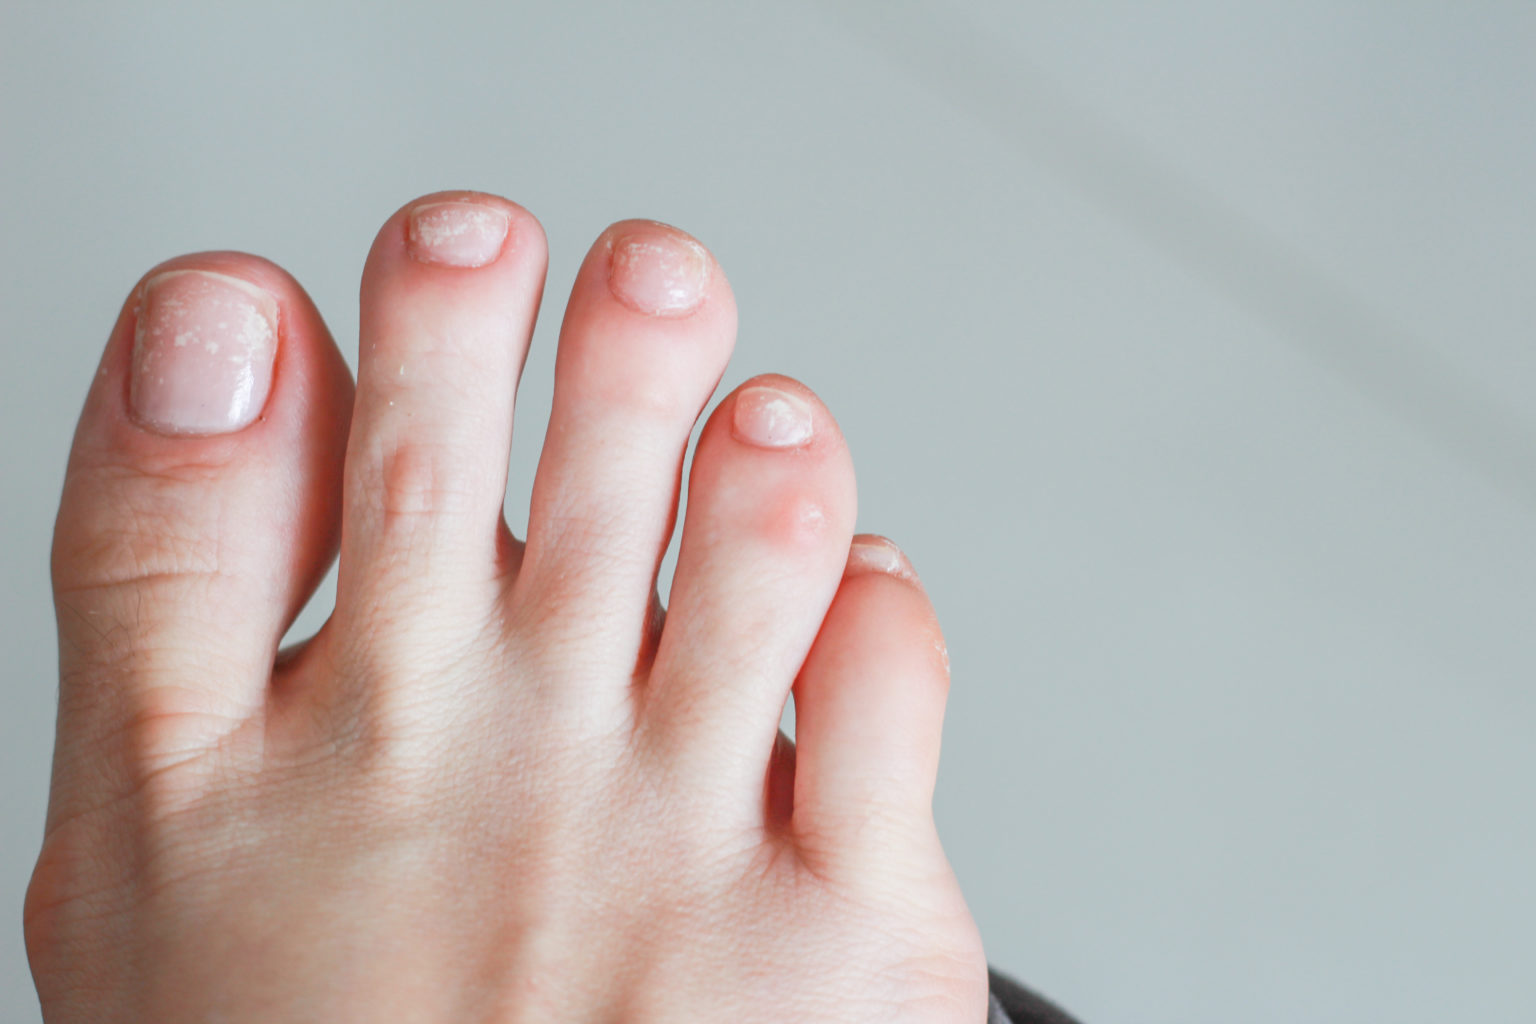 1. "March Toe Nail Color Ideas" - wide 3